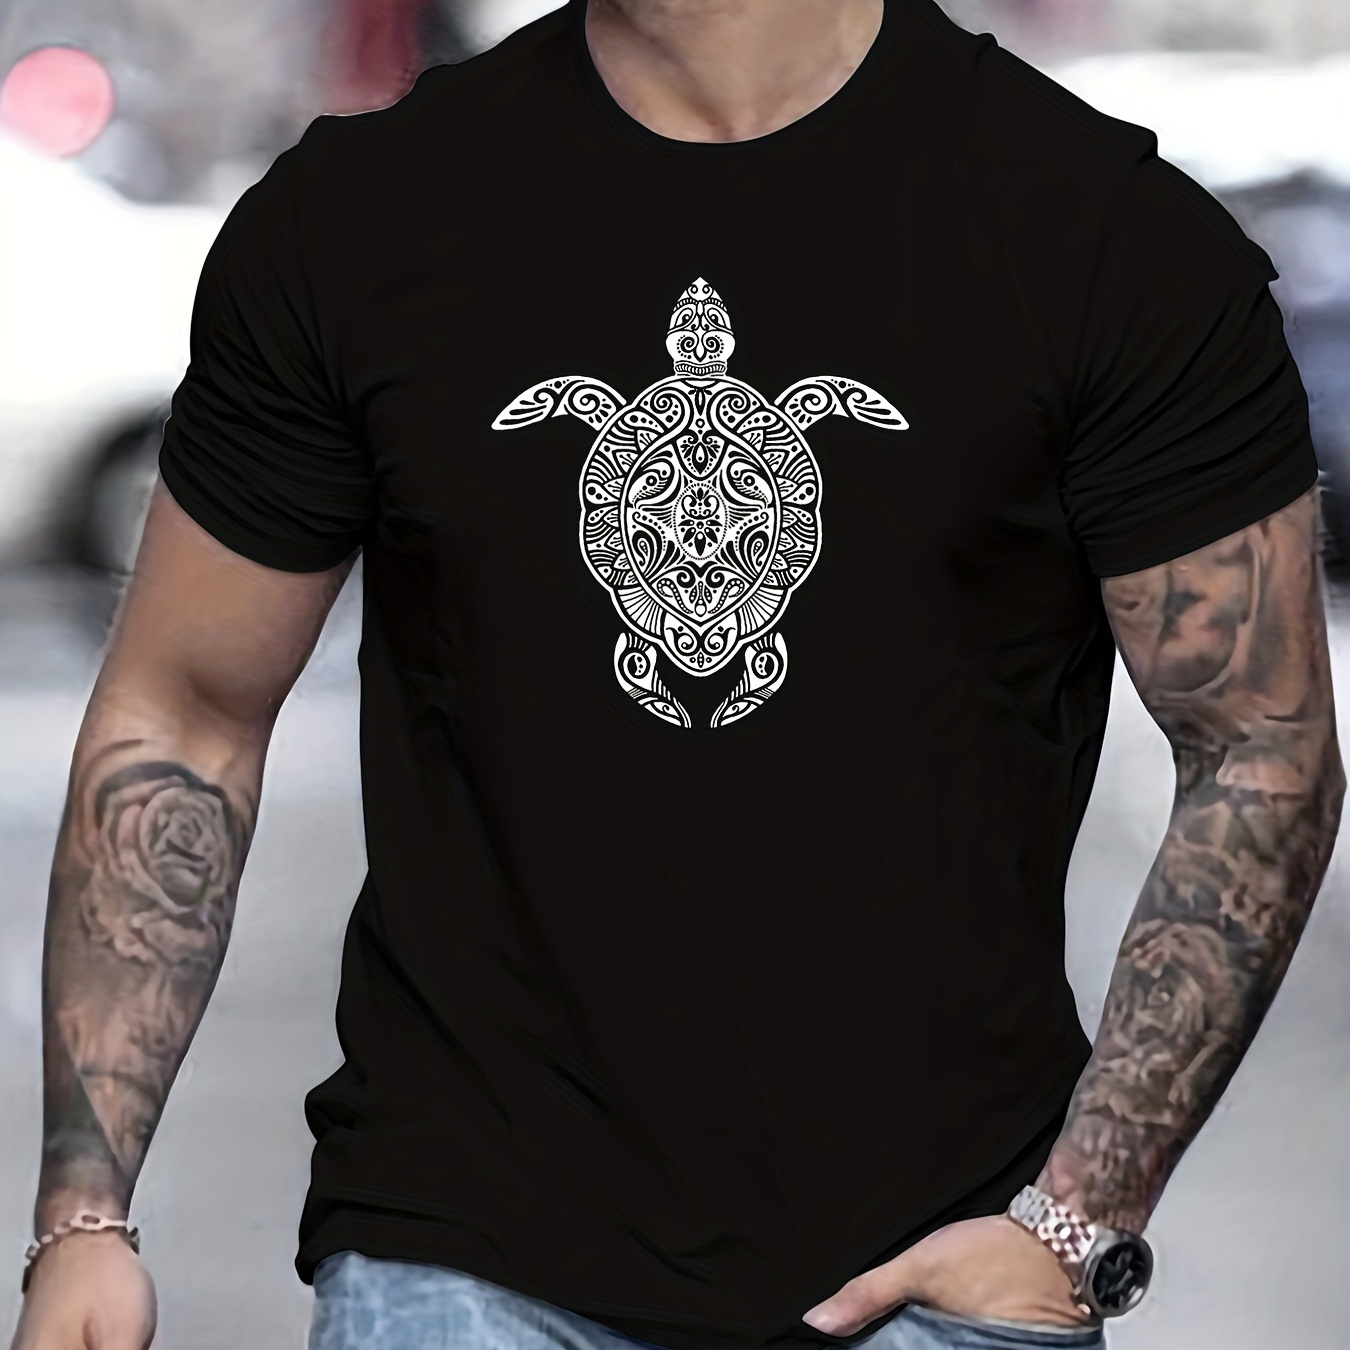 

Turtle Print T Shirt, Tees For Men, Casual Short Sleeve T-shirt For Summer